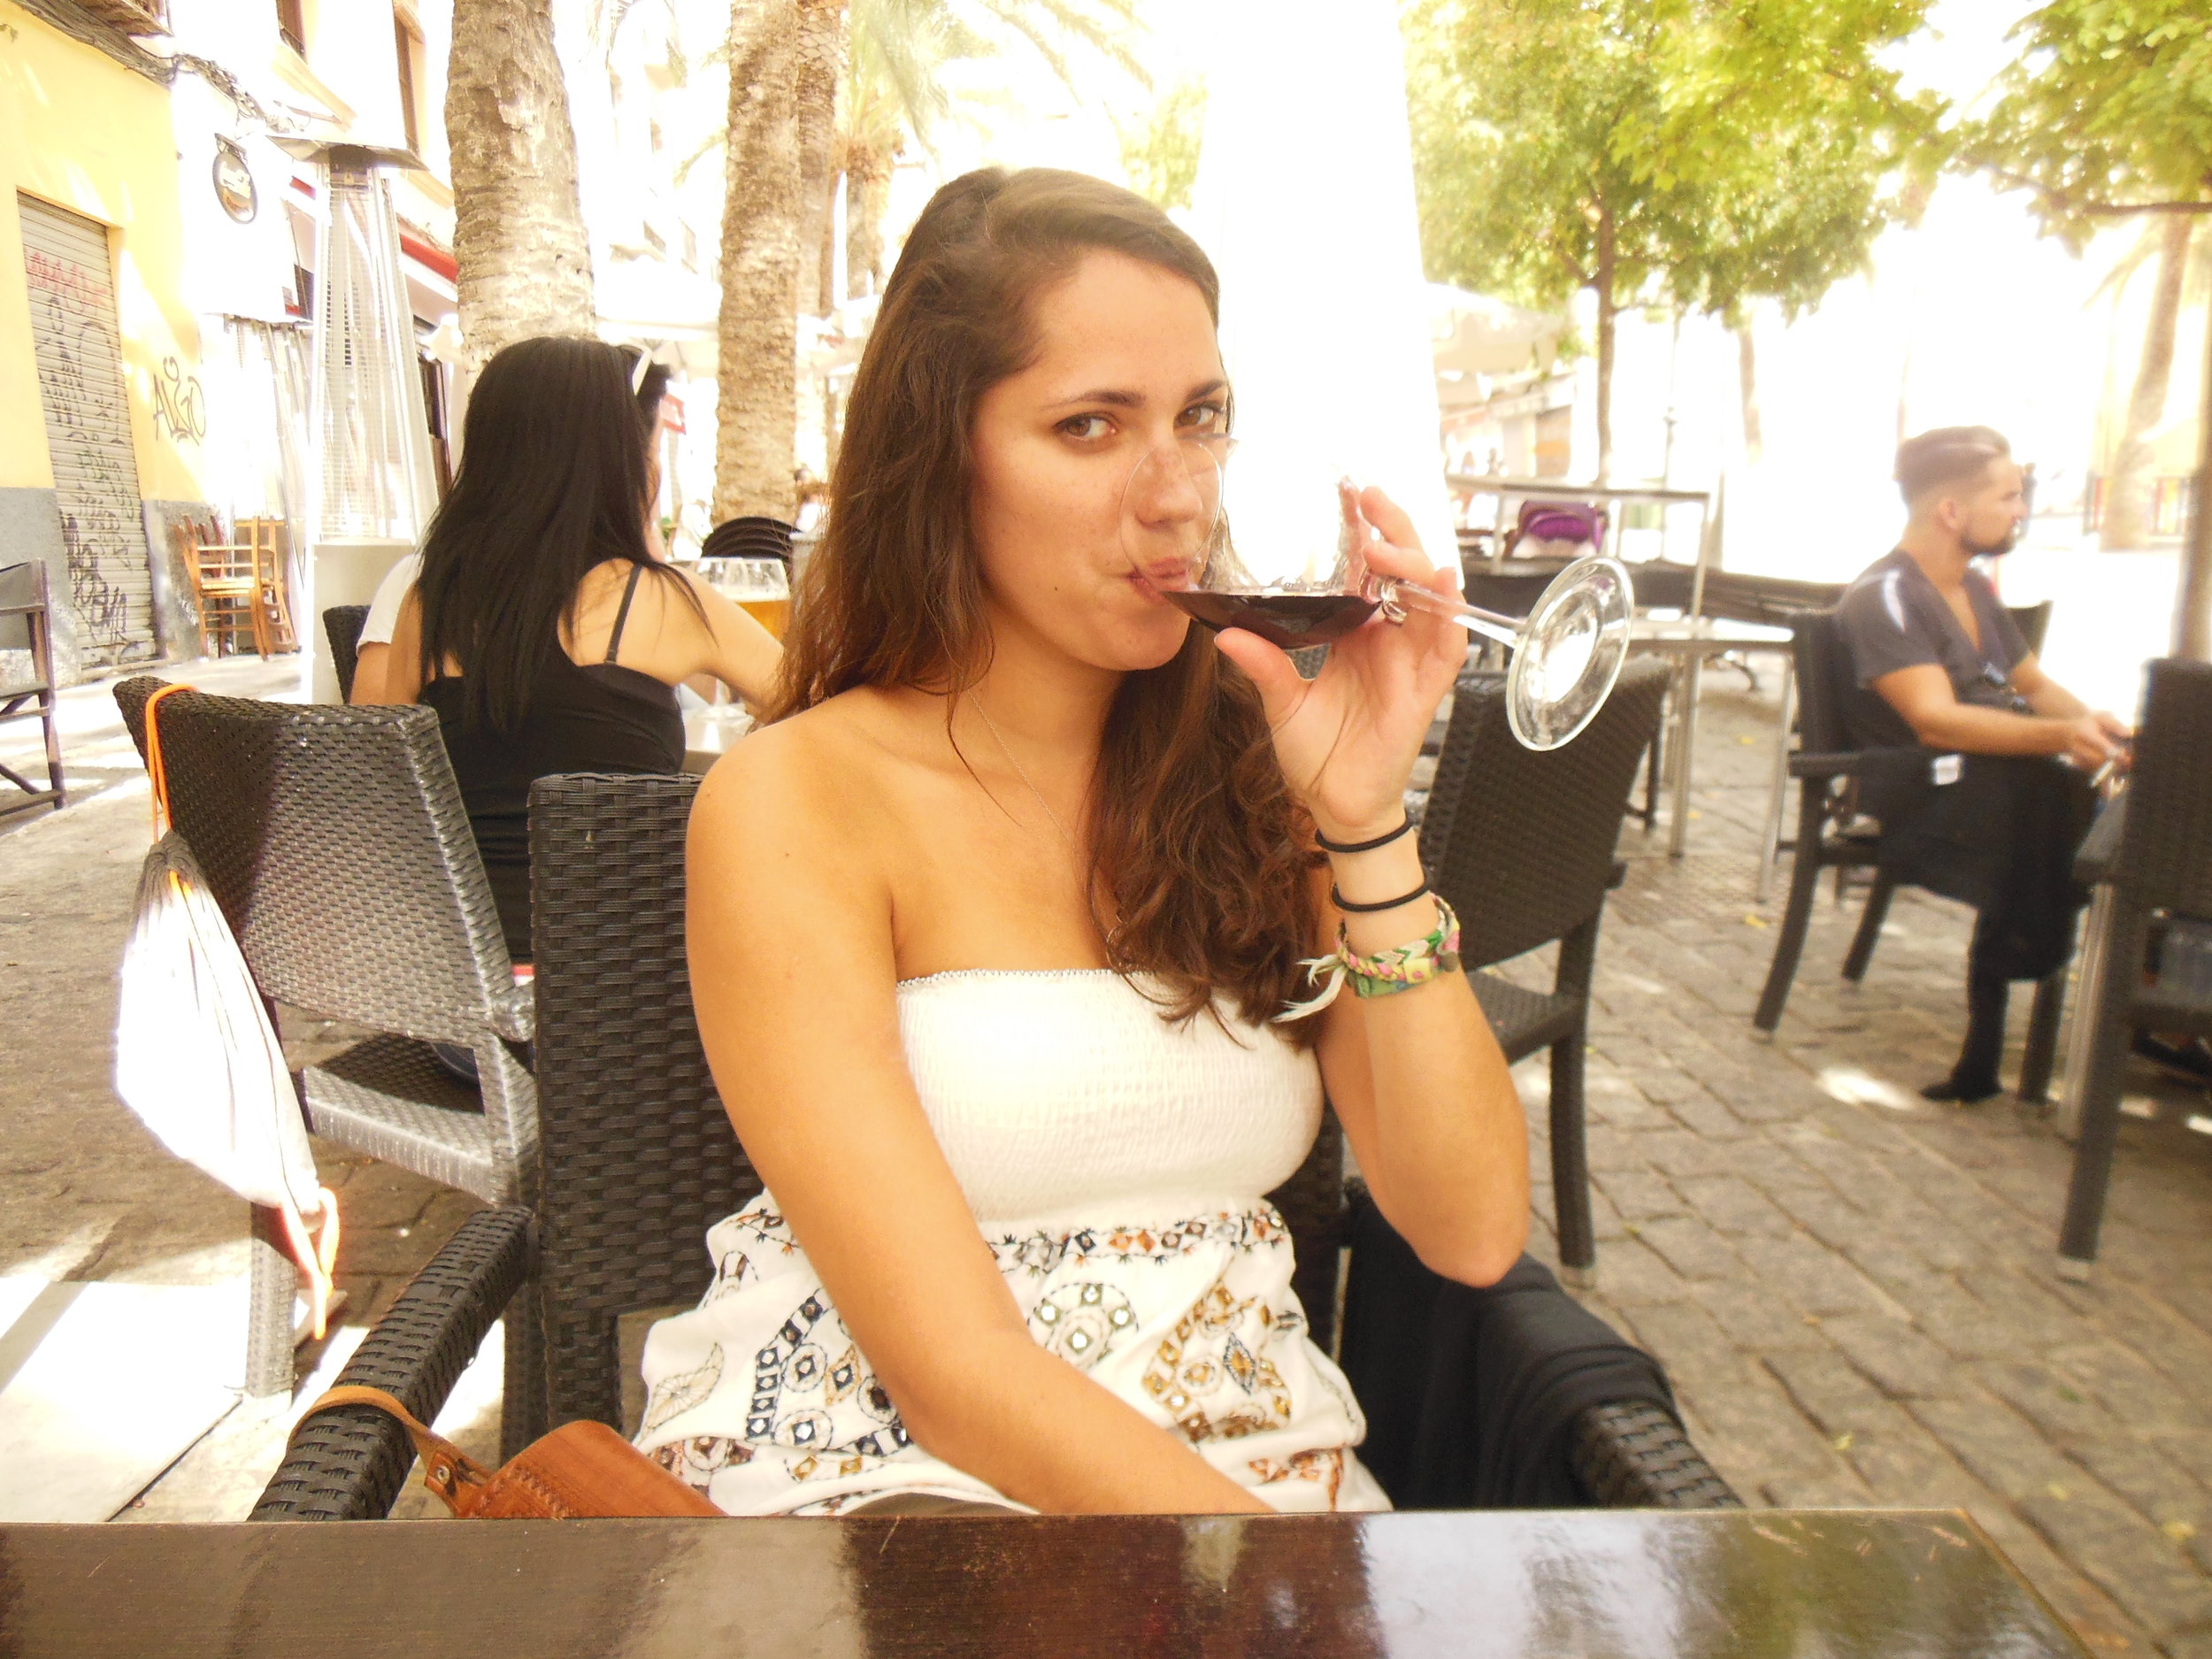 If I could summarize what I envisioned my life in Spain would look like, it’d be this photo!